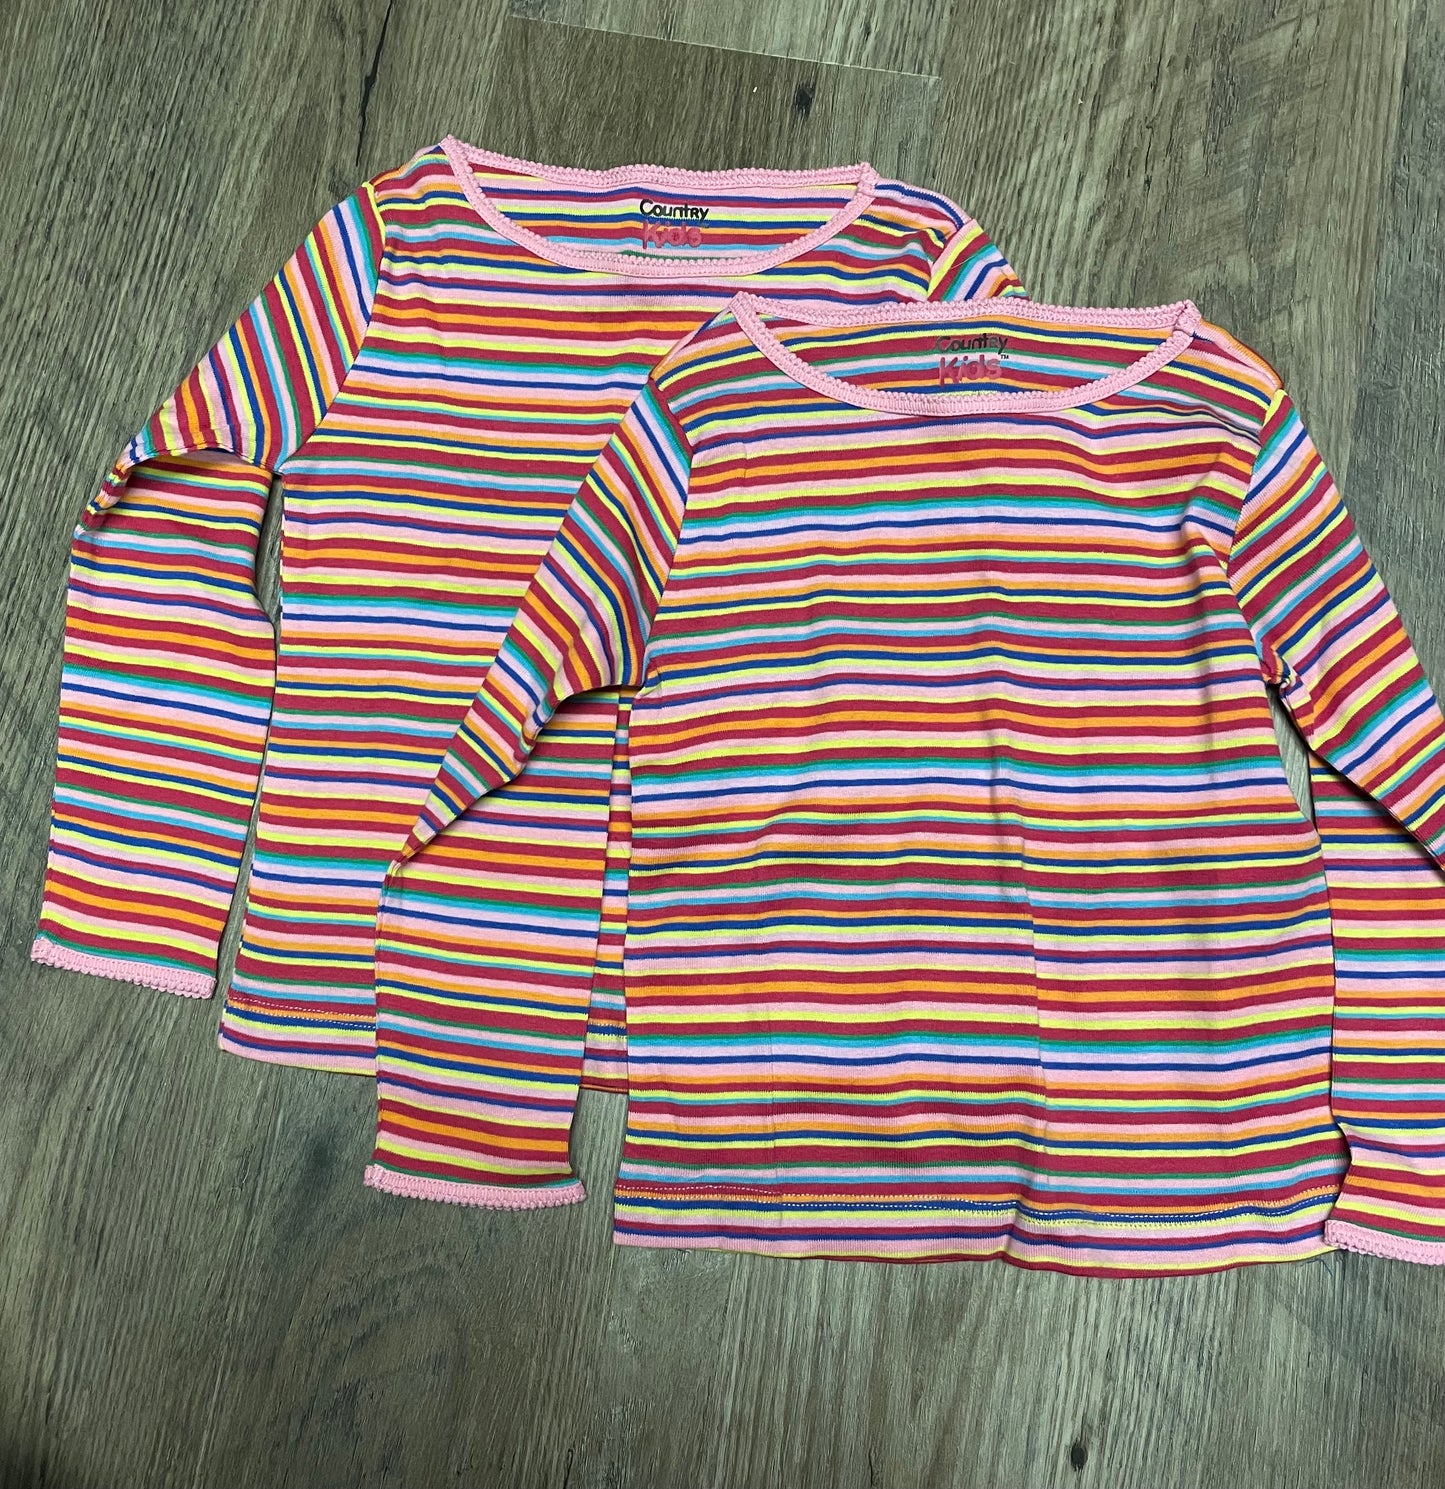 New girl 2 -3 yrs two long sleeve shirts. Country kids.